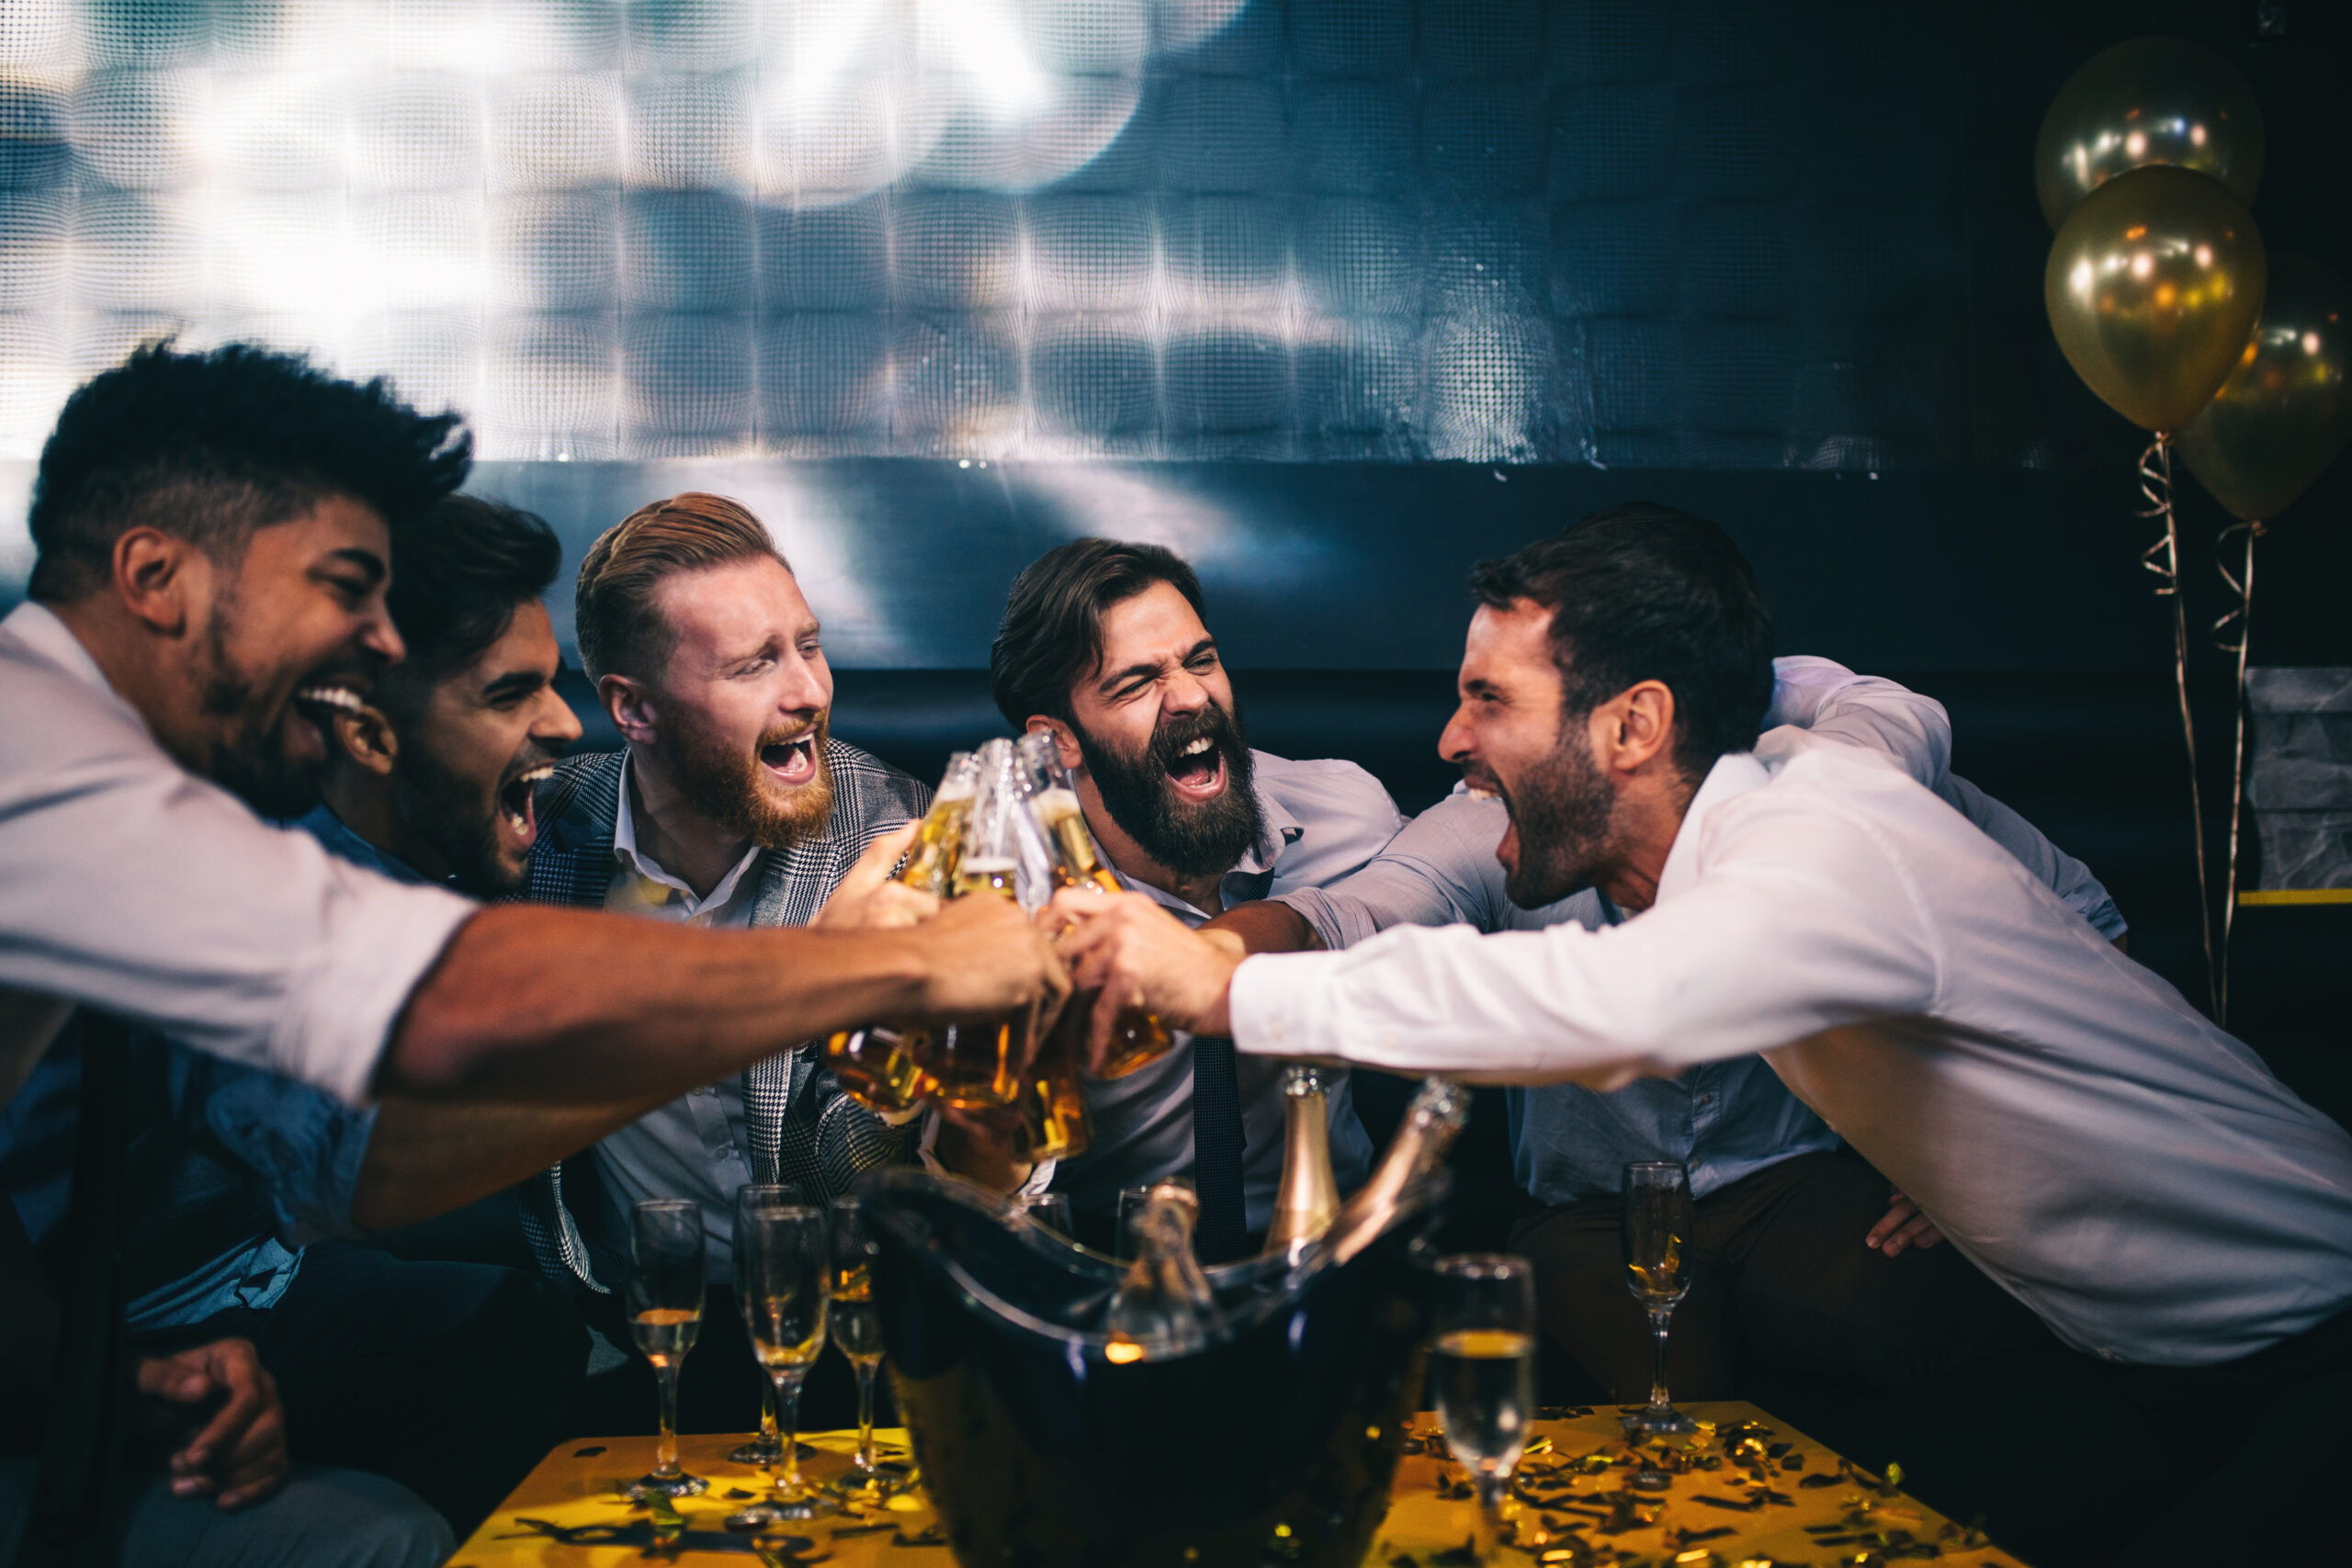 How to Have a Great Night Out